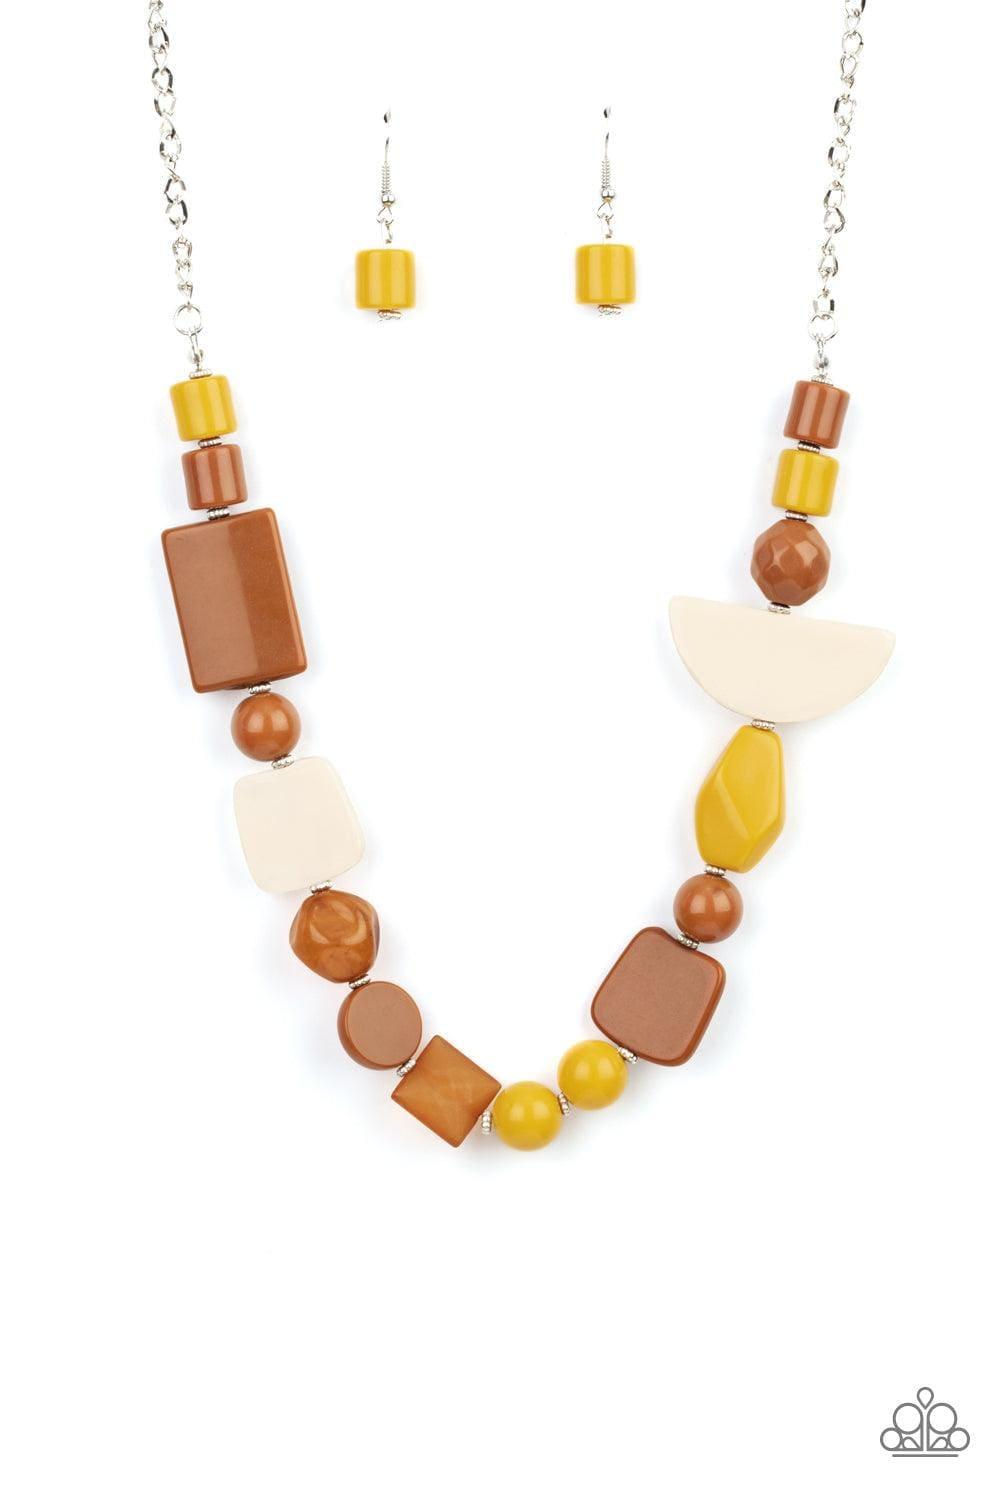 Paparazzi Accessories - Tranquil Trendsetter - Yellow Necklace - Bling by JessieK